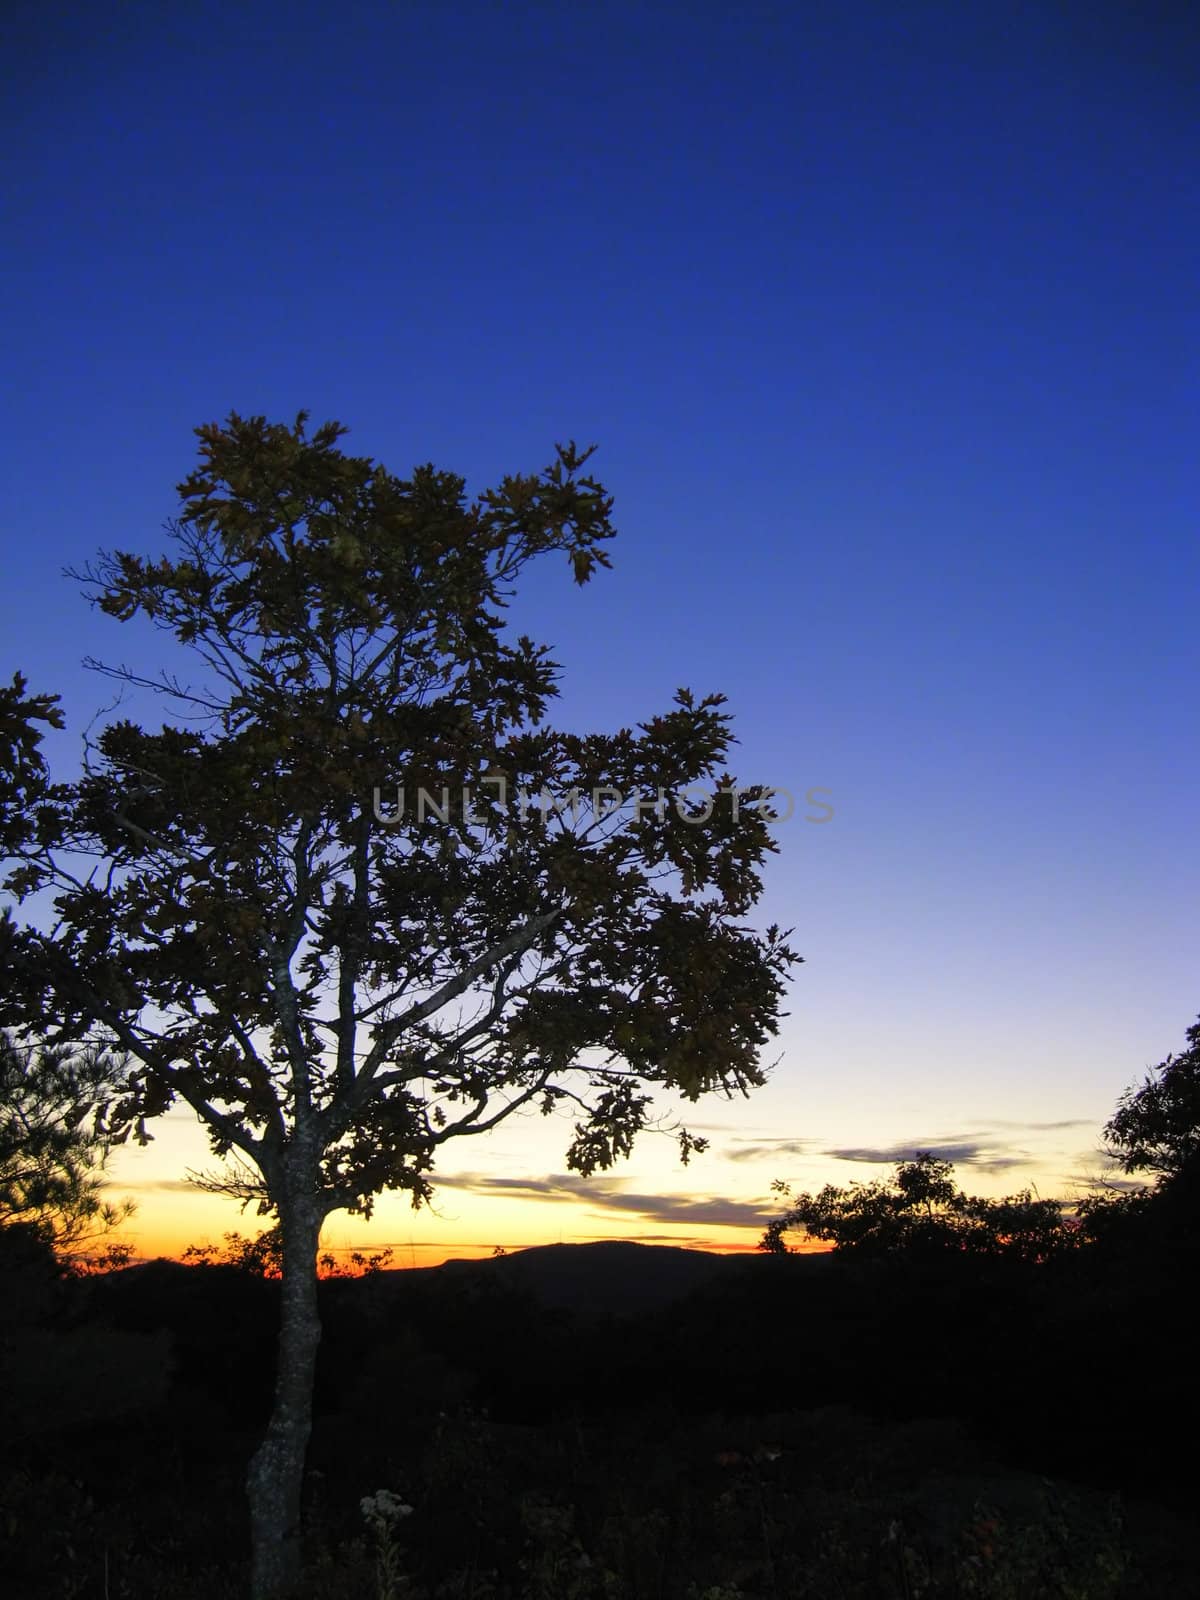 tree silhouetted at sunset, against the horizon